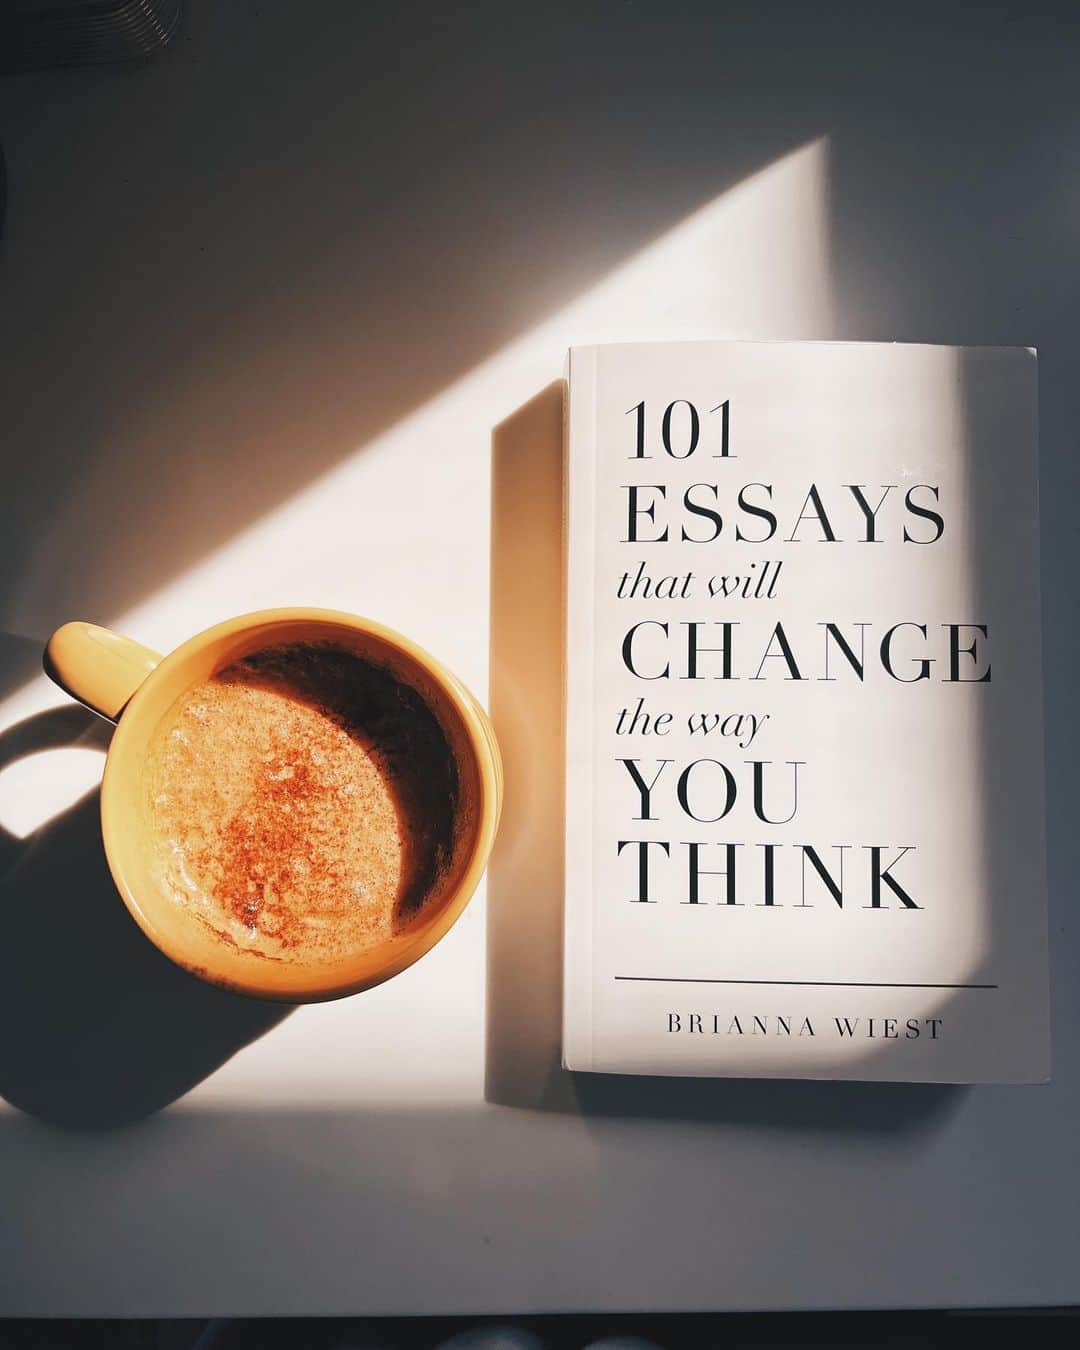 Kalyn Nicholsonのインスタグラム：「Current Sunday club read: 101 Essays That Will Change the Way You Think by Brianna Wiest   Pros: easily digestible, quick chapters, to-the-point takeaways that find their way into my mindset and decision-making for the day.  Cons: less cohesive flow as each chapter is a new essay on a different subject — however, this is really the nature of the book. It’s just not my most preferred style of writing.  Good for: pickup/here and there reading (instead of cover to cover), wanting to refresh your perspective on life and gaining some easy insight and inspiration.   Has anyone else read this? If so, what are your thoughts? If not, what are you reading now?」